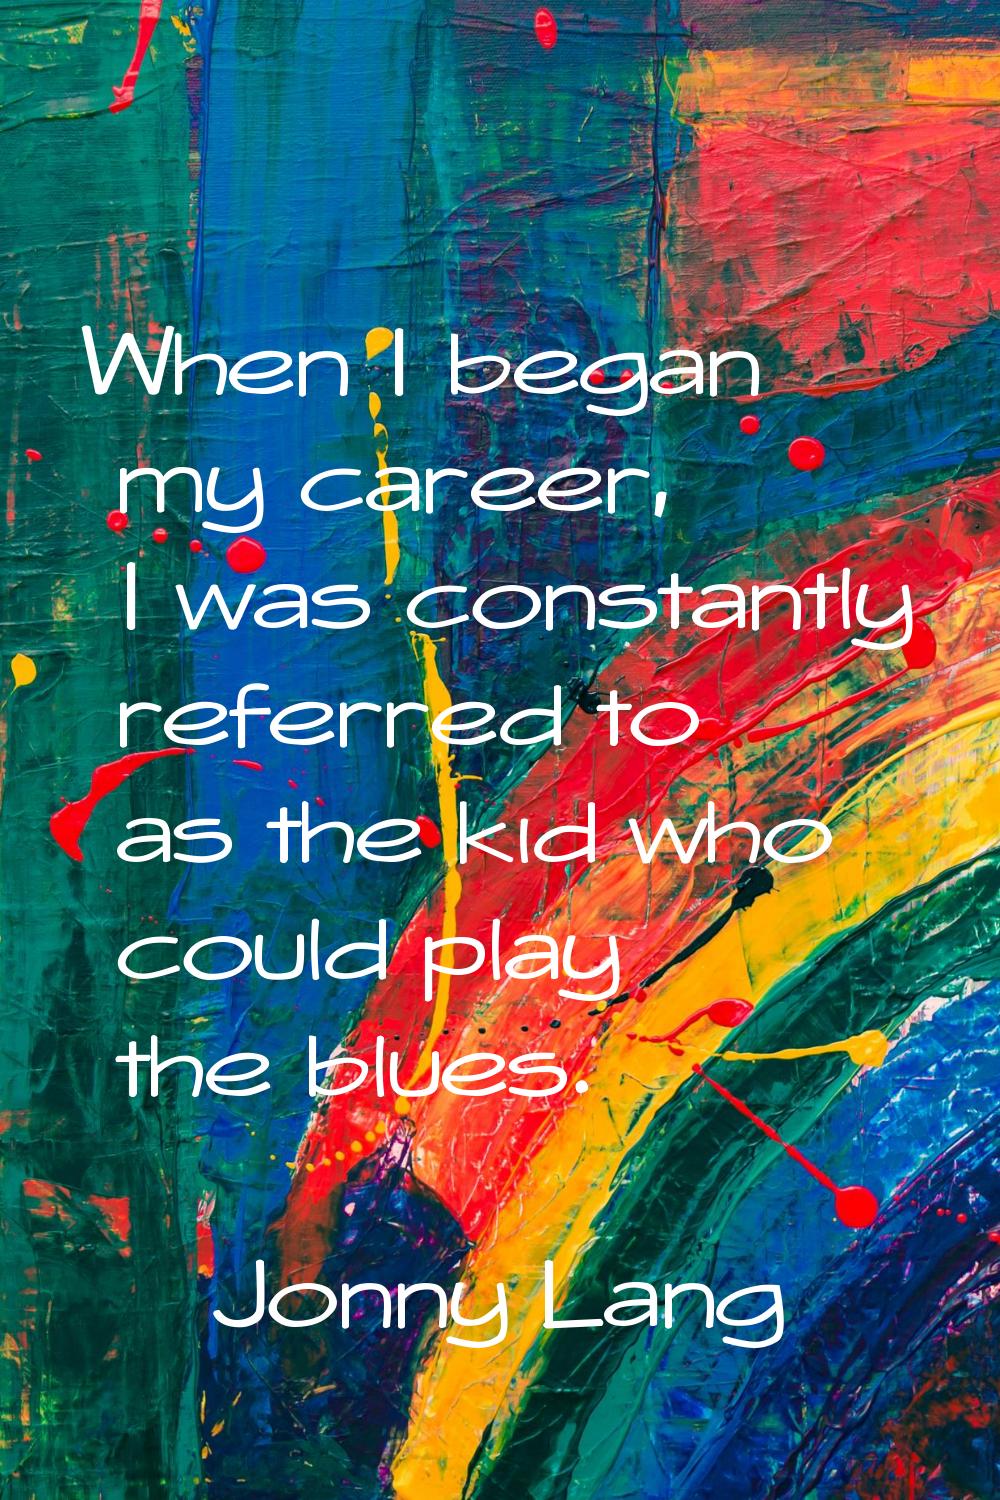 When I began my career, I was constantly referred to as the kid who could play the blues.